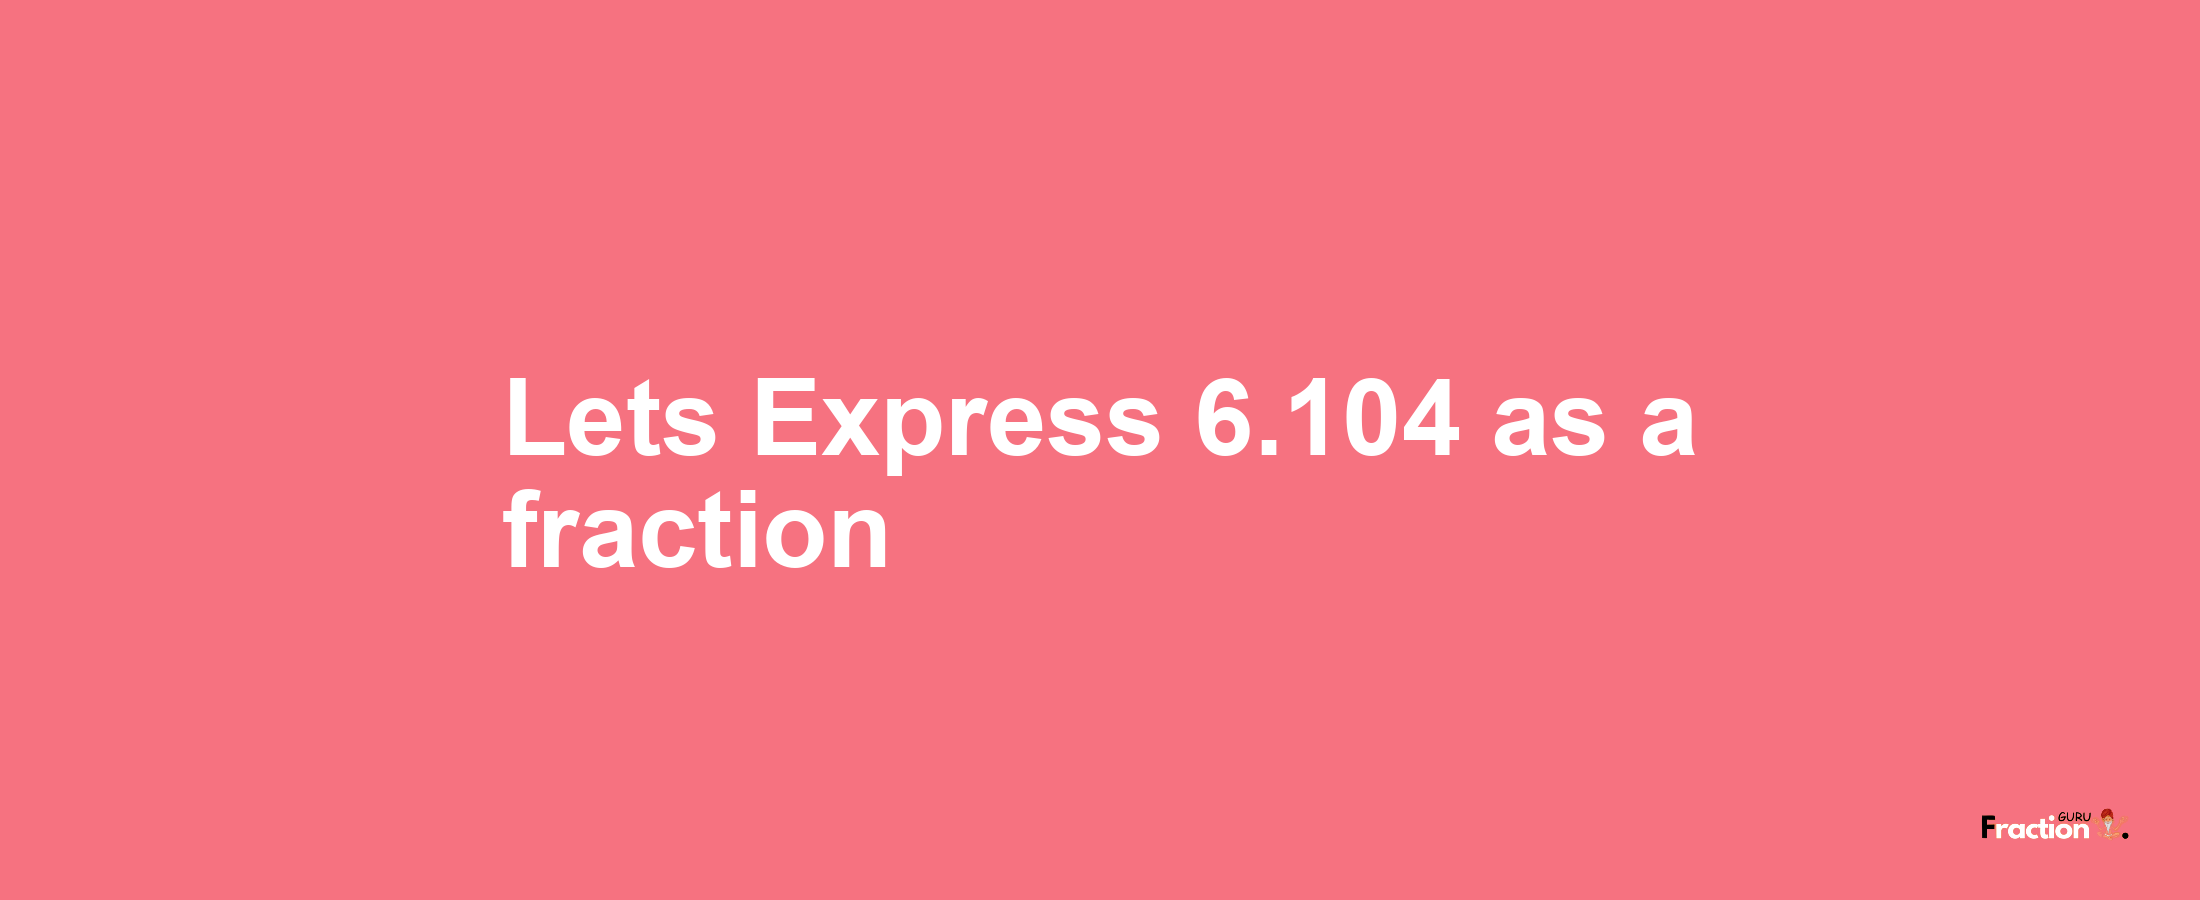 Lets Express 6.104 as afraction